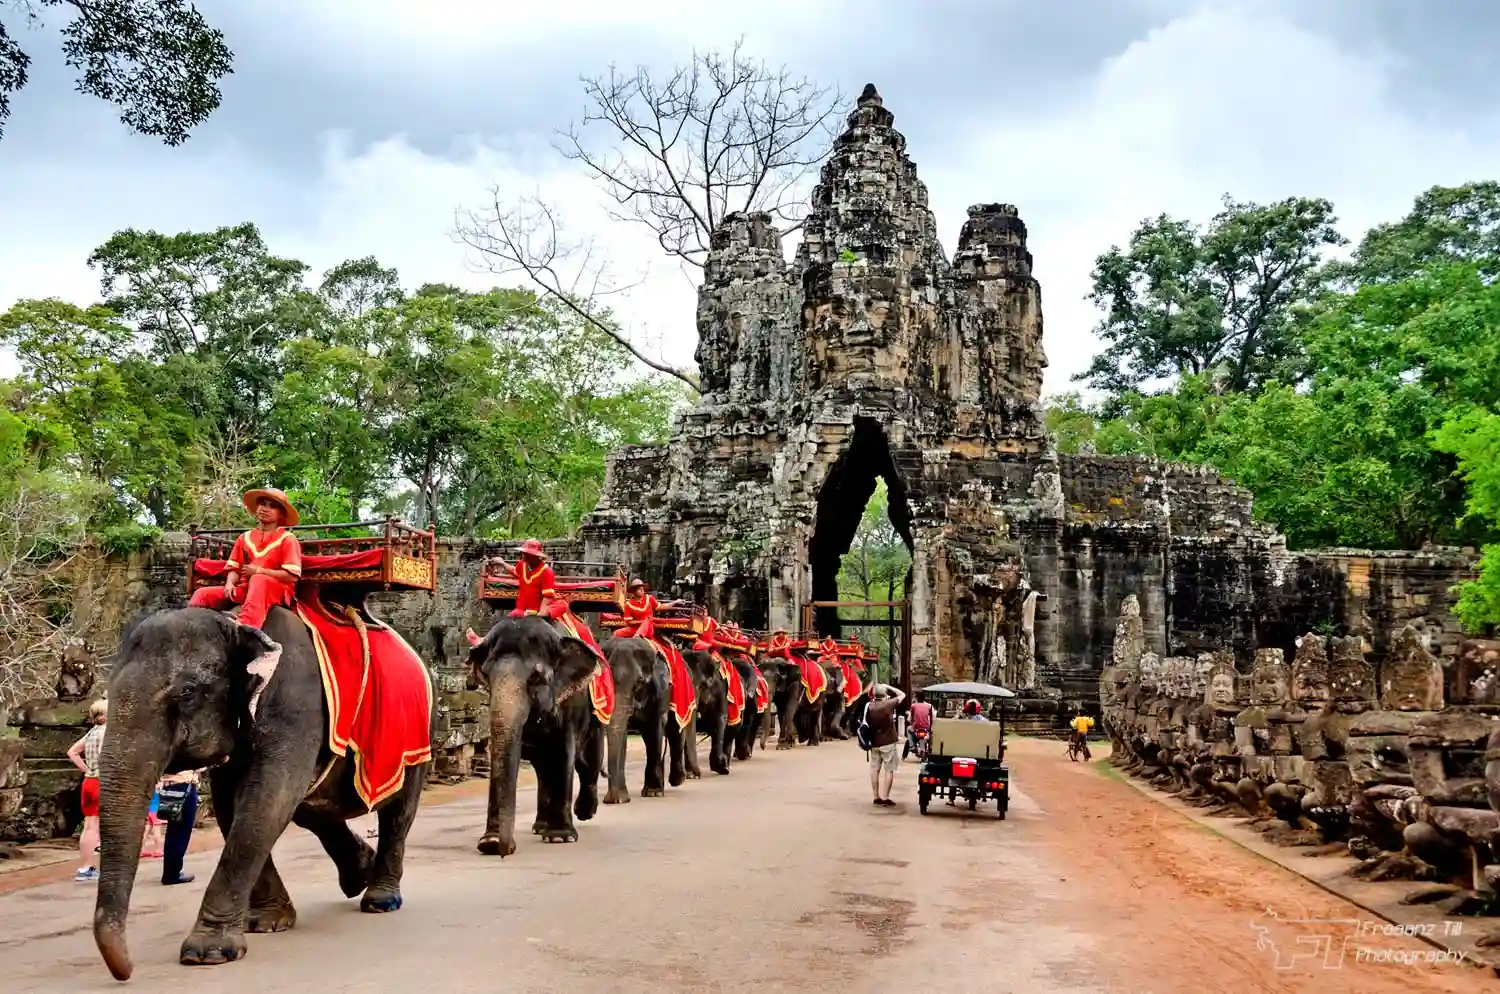 Cambodia Tour Siem Reap Cambodia Tourism in Cambodia cheapest places to travel when youre young and broke